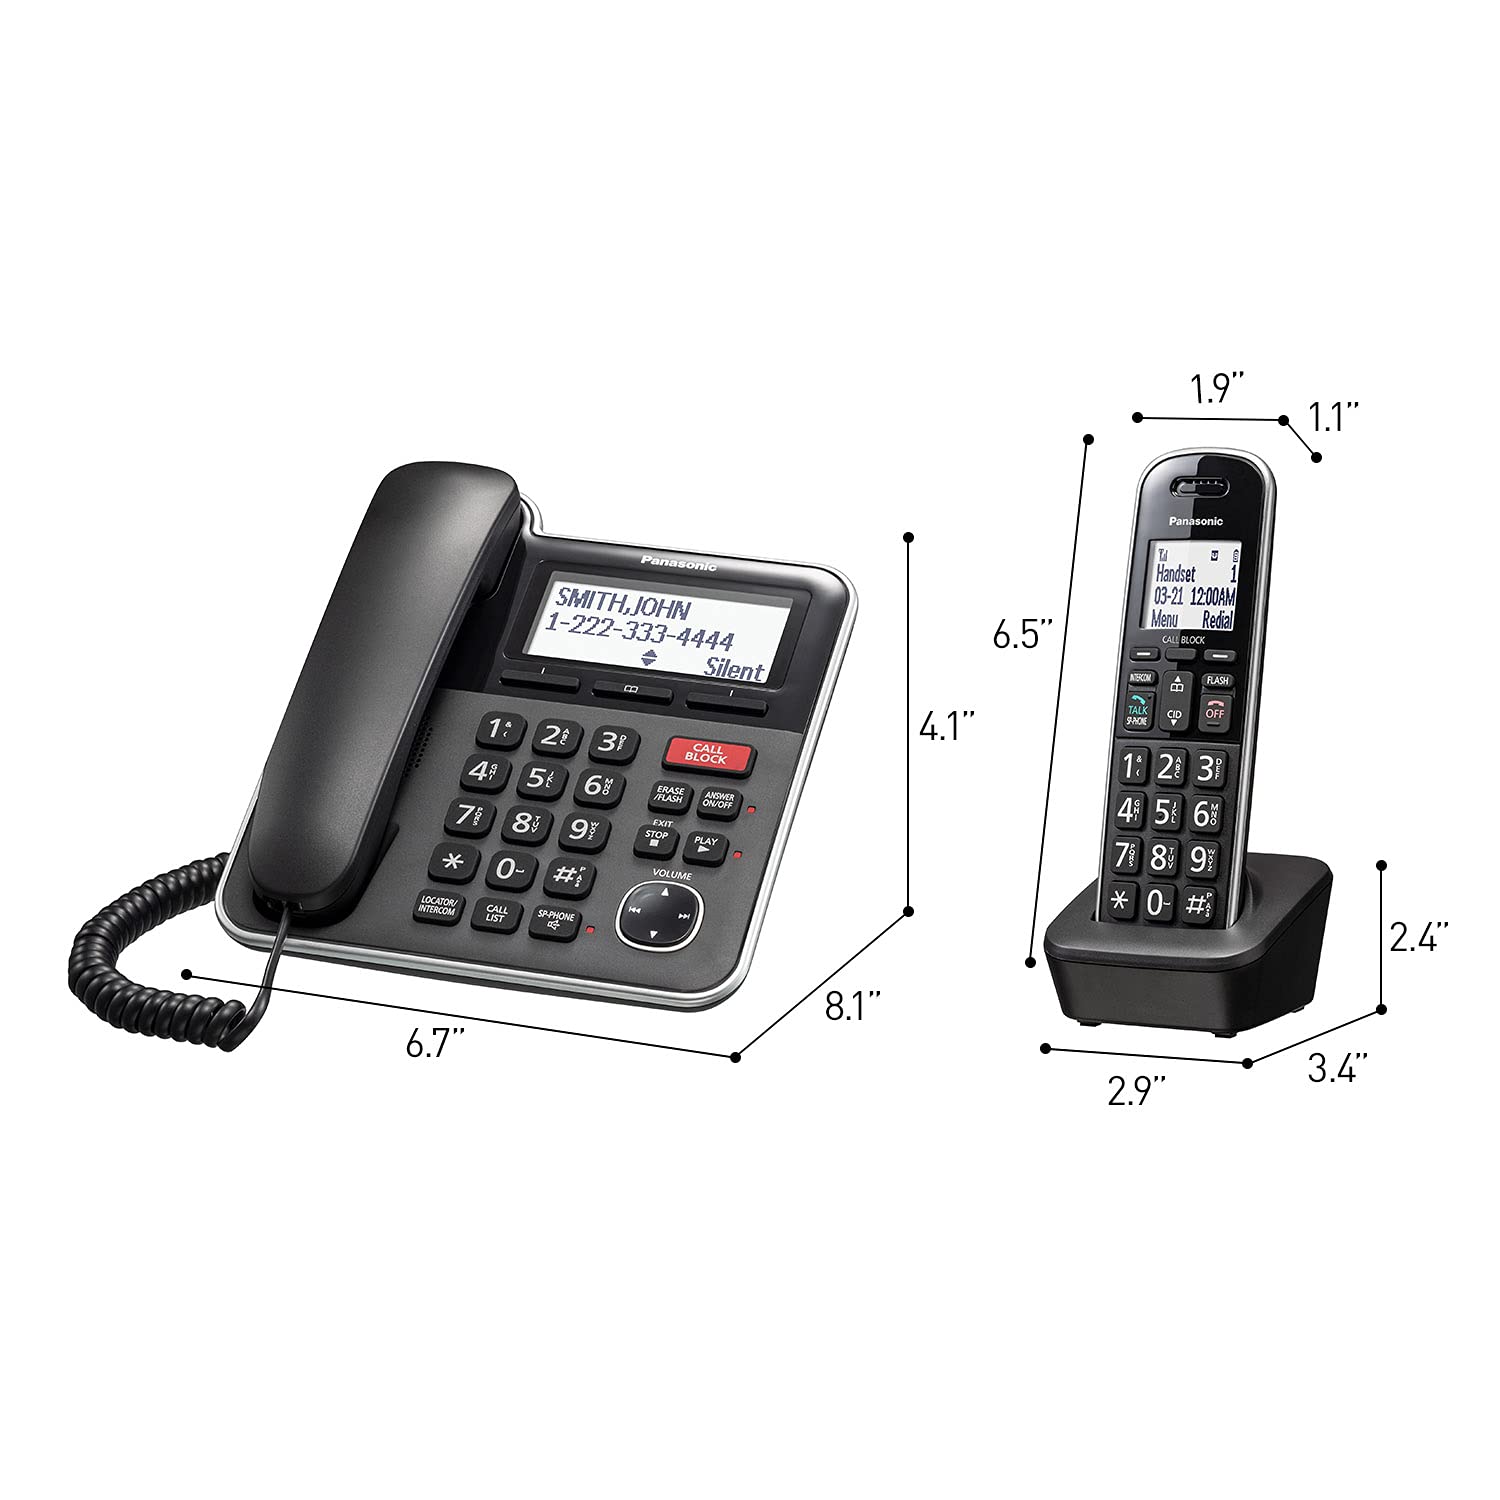 Panasonic Expandable Corded/Cordless Phone System with Answering Machine and One Touch Call Blocking – 1 Handset - KX-TGB850B (Black)